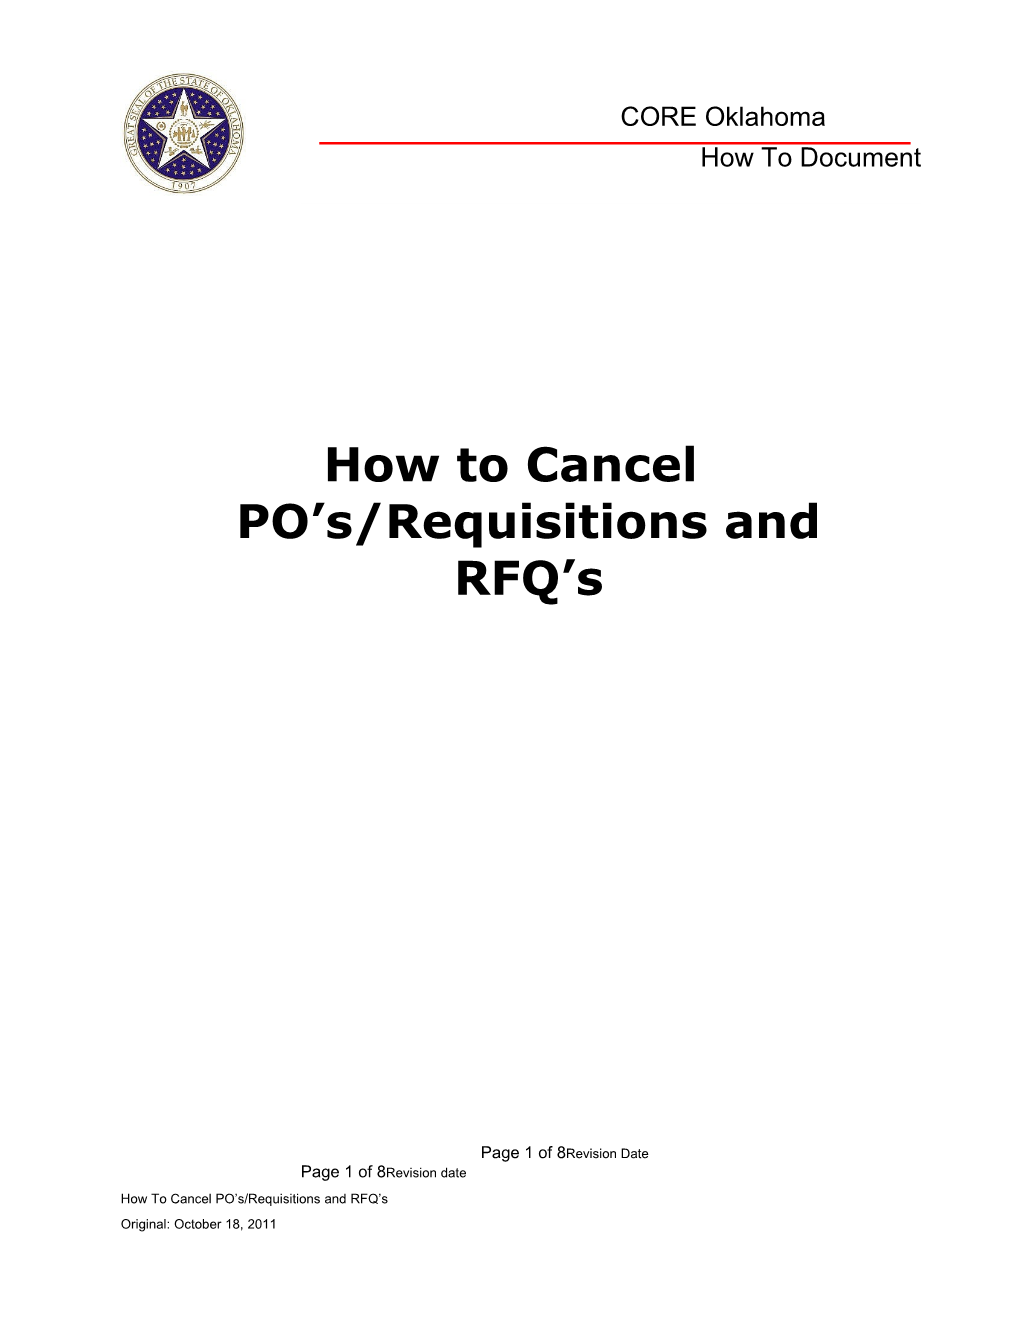 CORE How to Cancel PO S, Requisitions and RFQ S